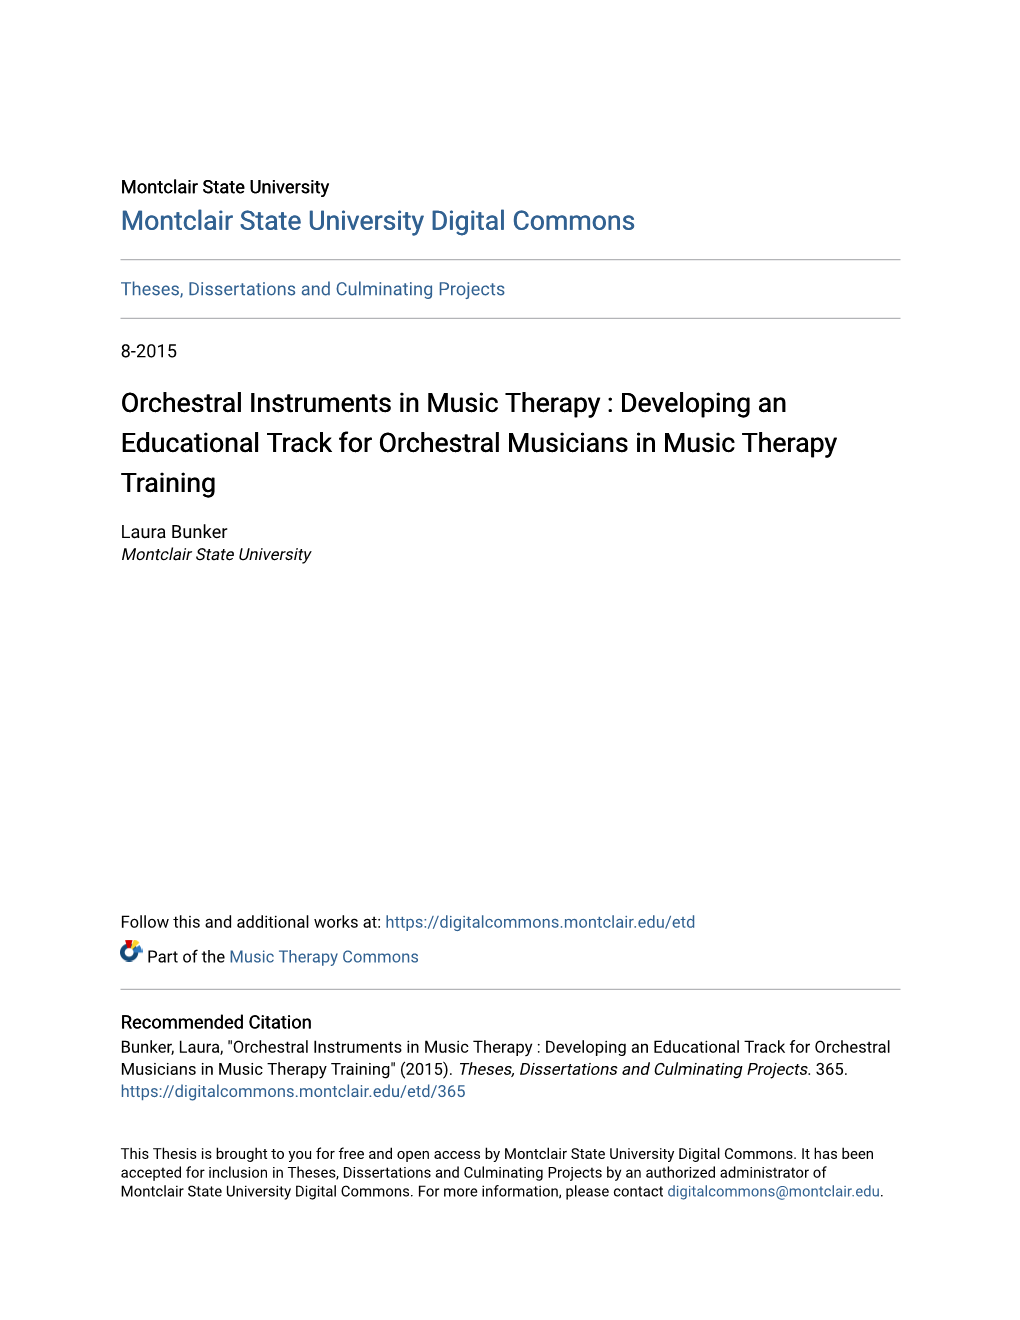 Orchestral Instruments in Music Therapy : Developing an Educational Track for Orchestral Musicians in Music Therapy Training